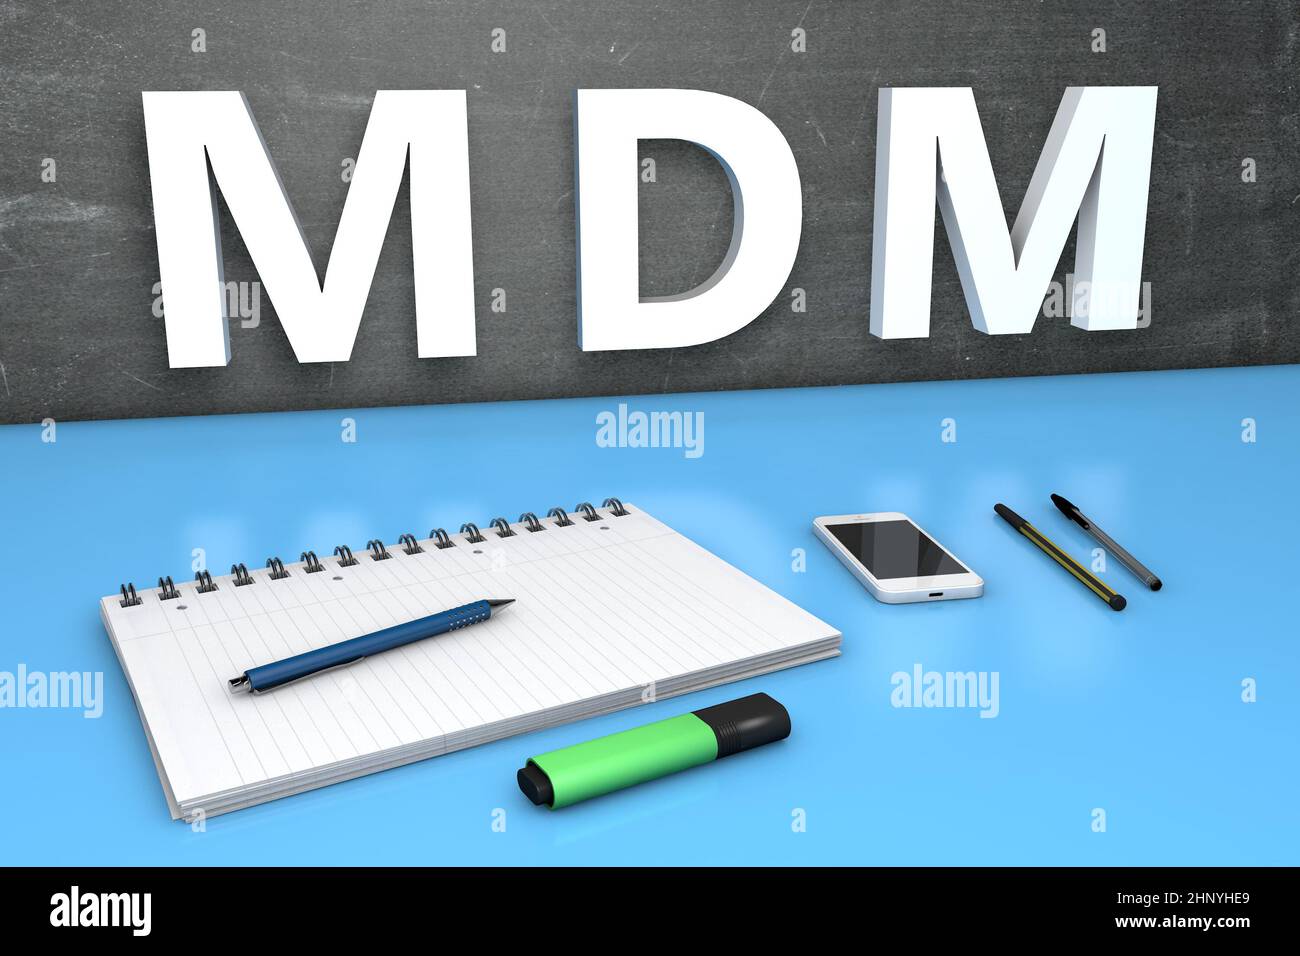 MDM - Mobile Device Management - text concept with chalkboard, notebook, pens and mobile phone. 3D render illustration. Stock Photo